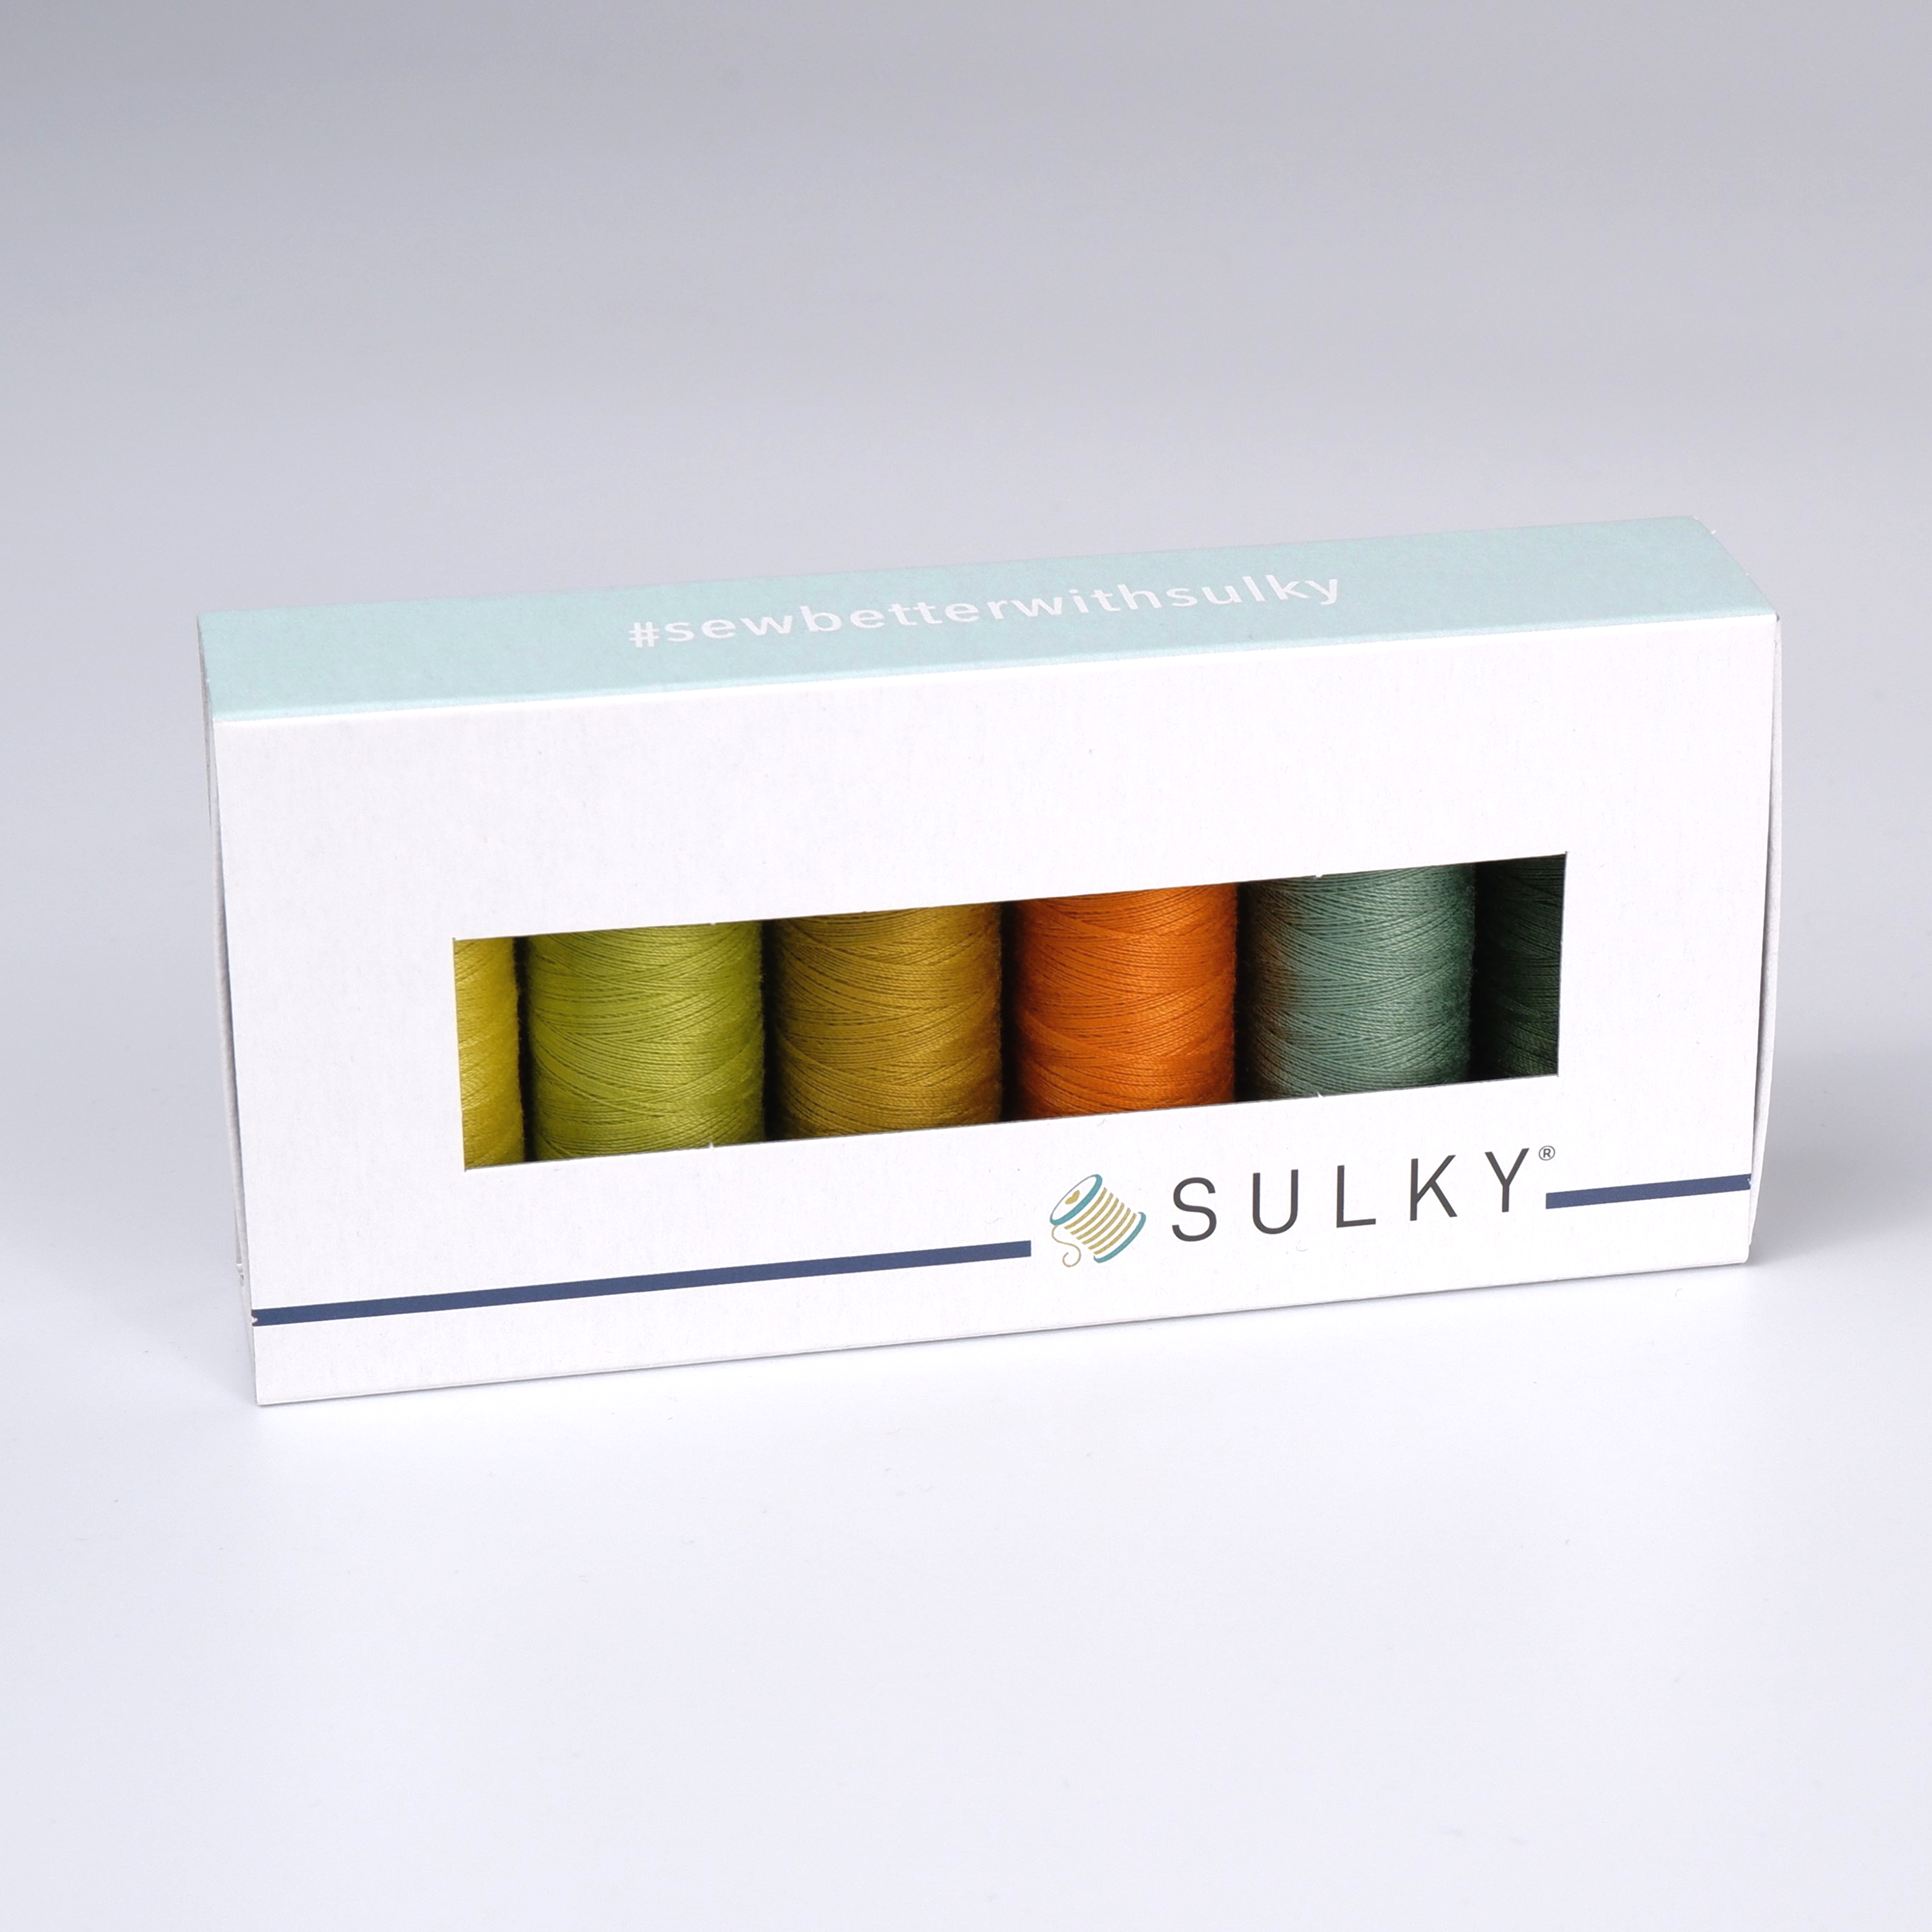 SULKY COTTON 50 - FOREST AND FAUNA 1
(6x 147m Snap Spools)